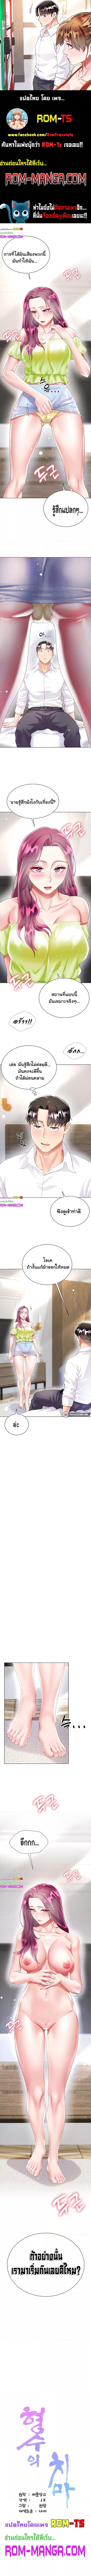 My Sister-in-law’s Skirt 25 ภาพที่ 1